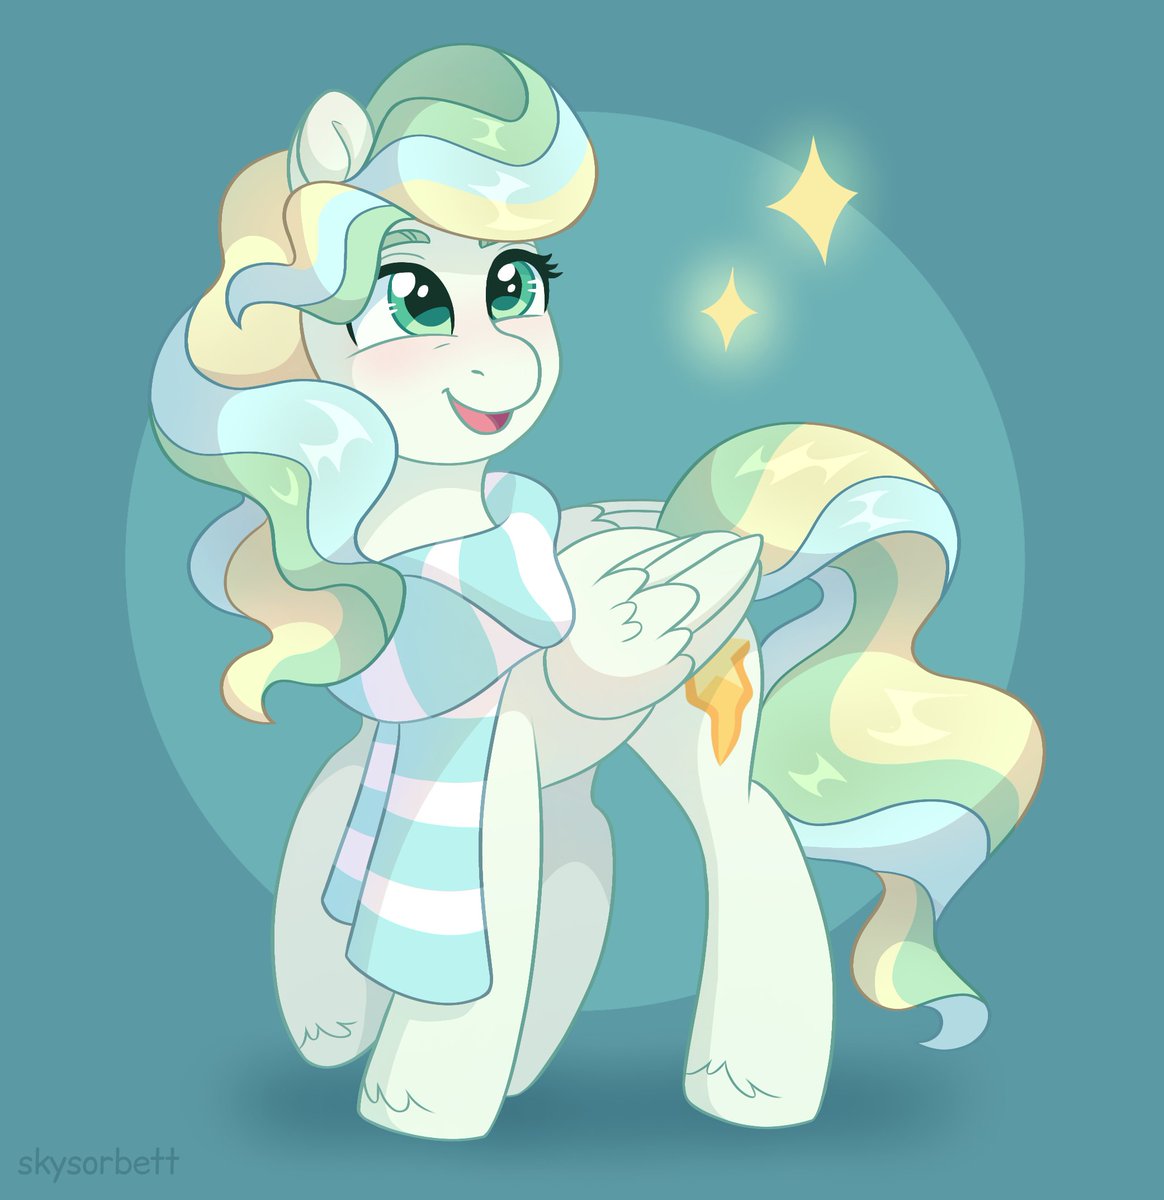 One of the cutest ponies from G4 ^^
#mlp #mylittlepony #vaportrail